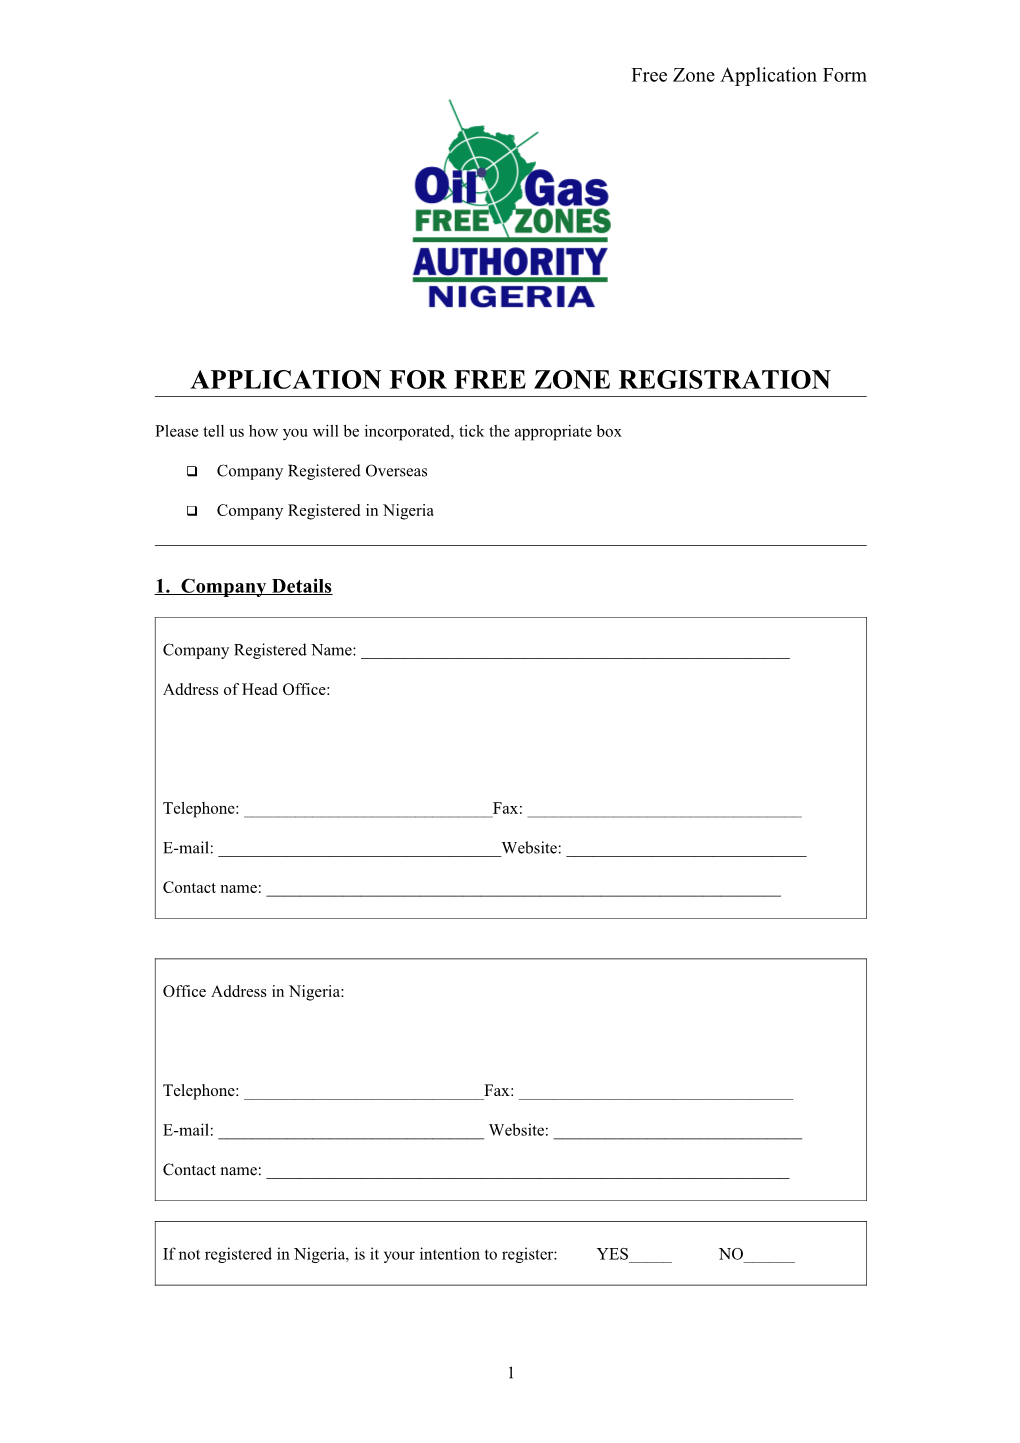 Application for Free Zone Registration